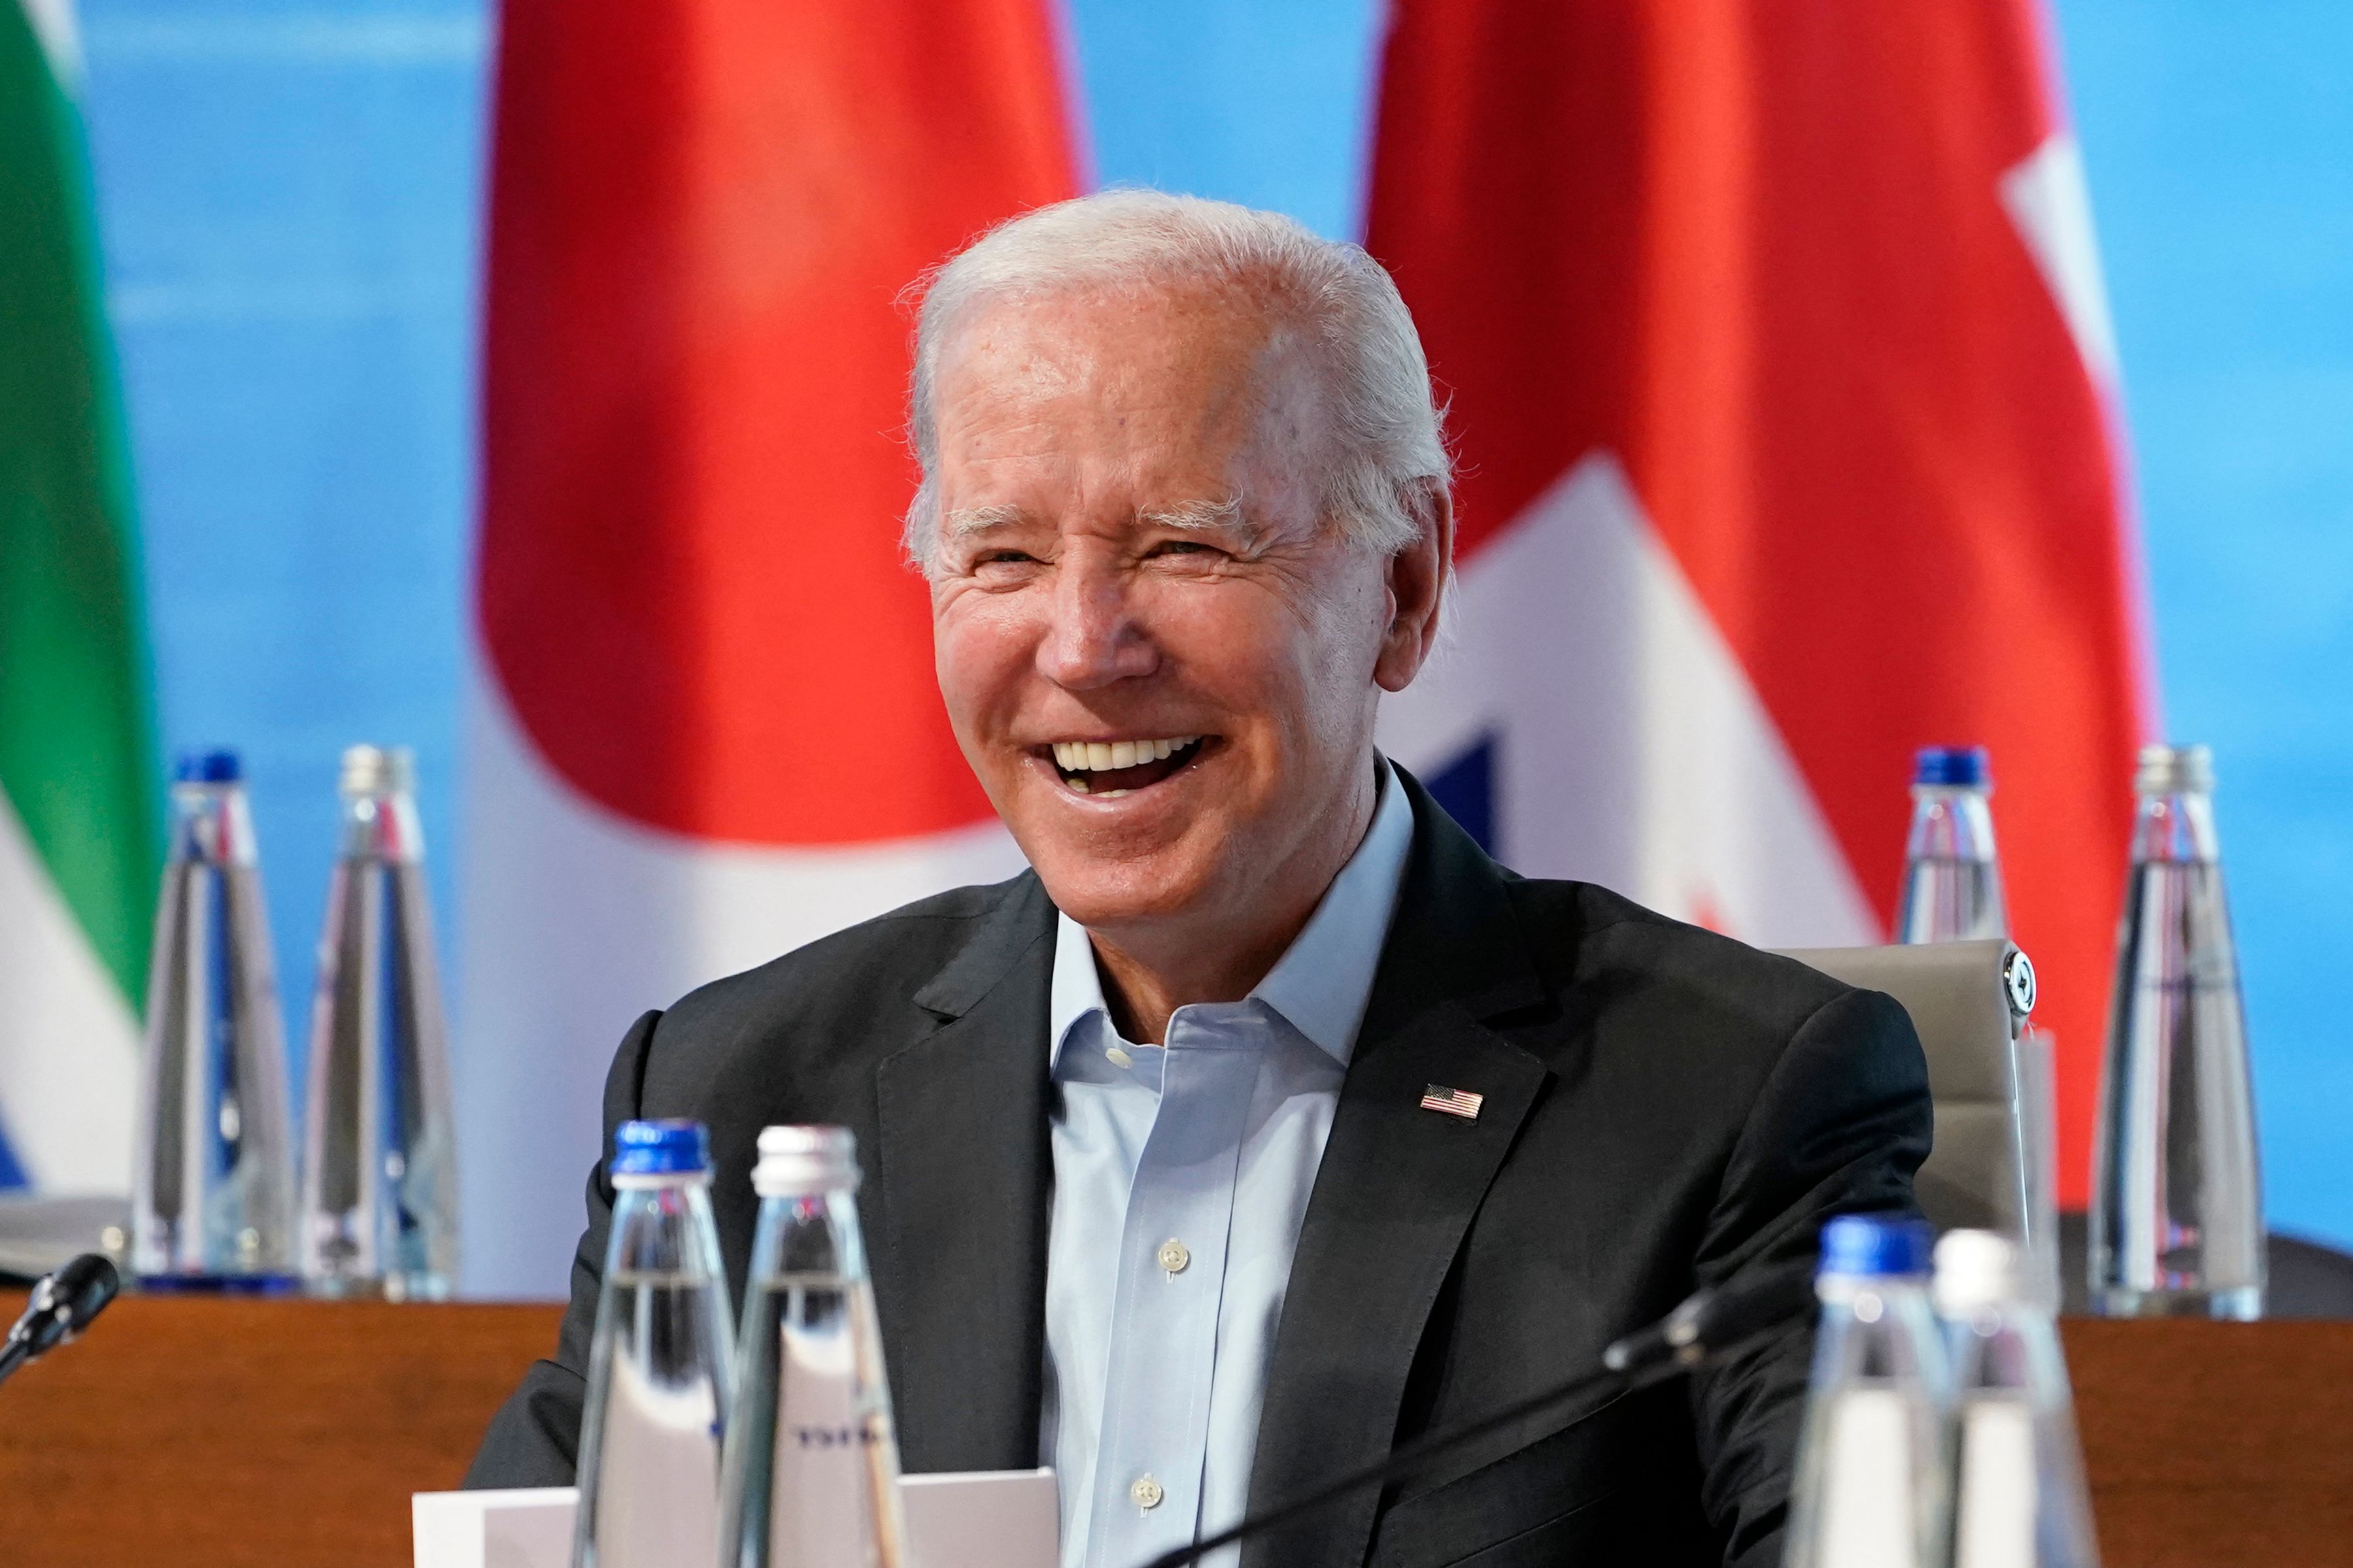 US President Joe Biden smiles at the start of a lunch with Representatives of Seven rich nations (G7) and Outreach guests during their fifth working session about "Investing in a better future: Climate, Energy, Health" on June 27, at Elmau Castle, Germany.